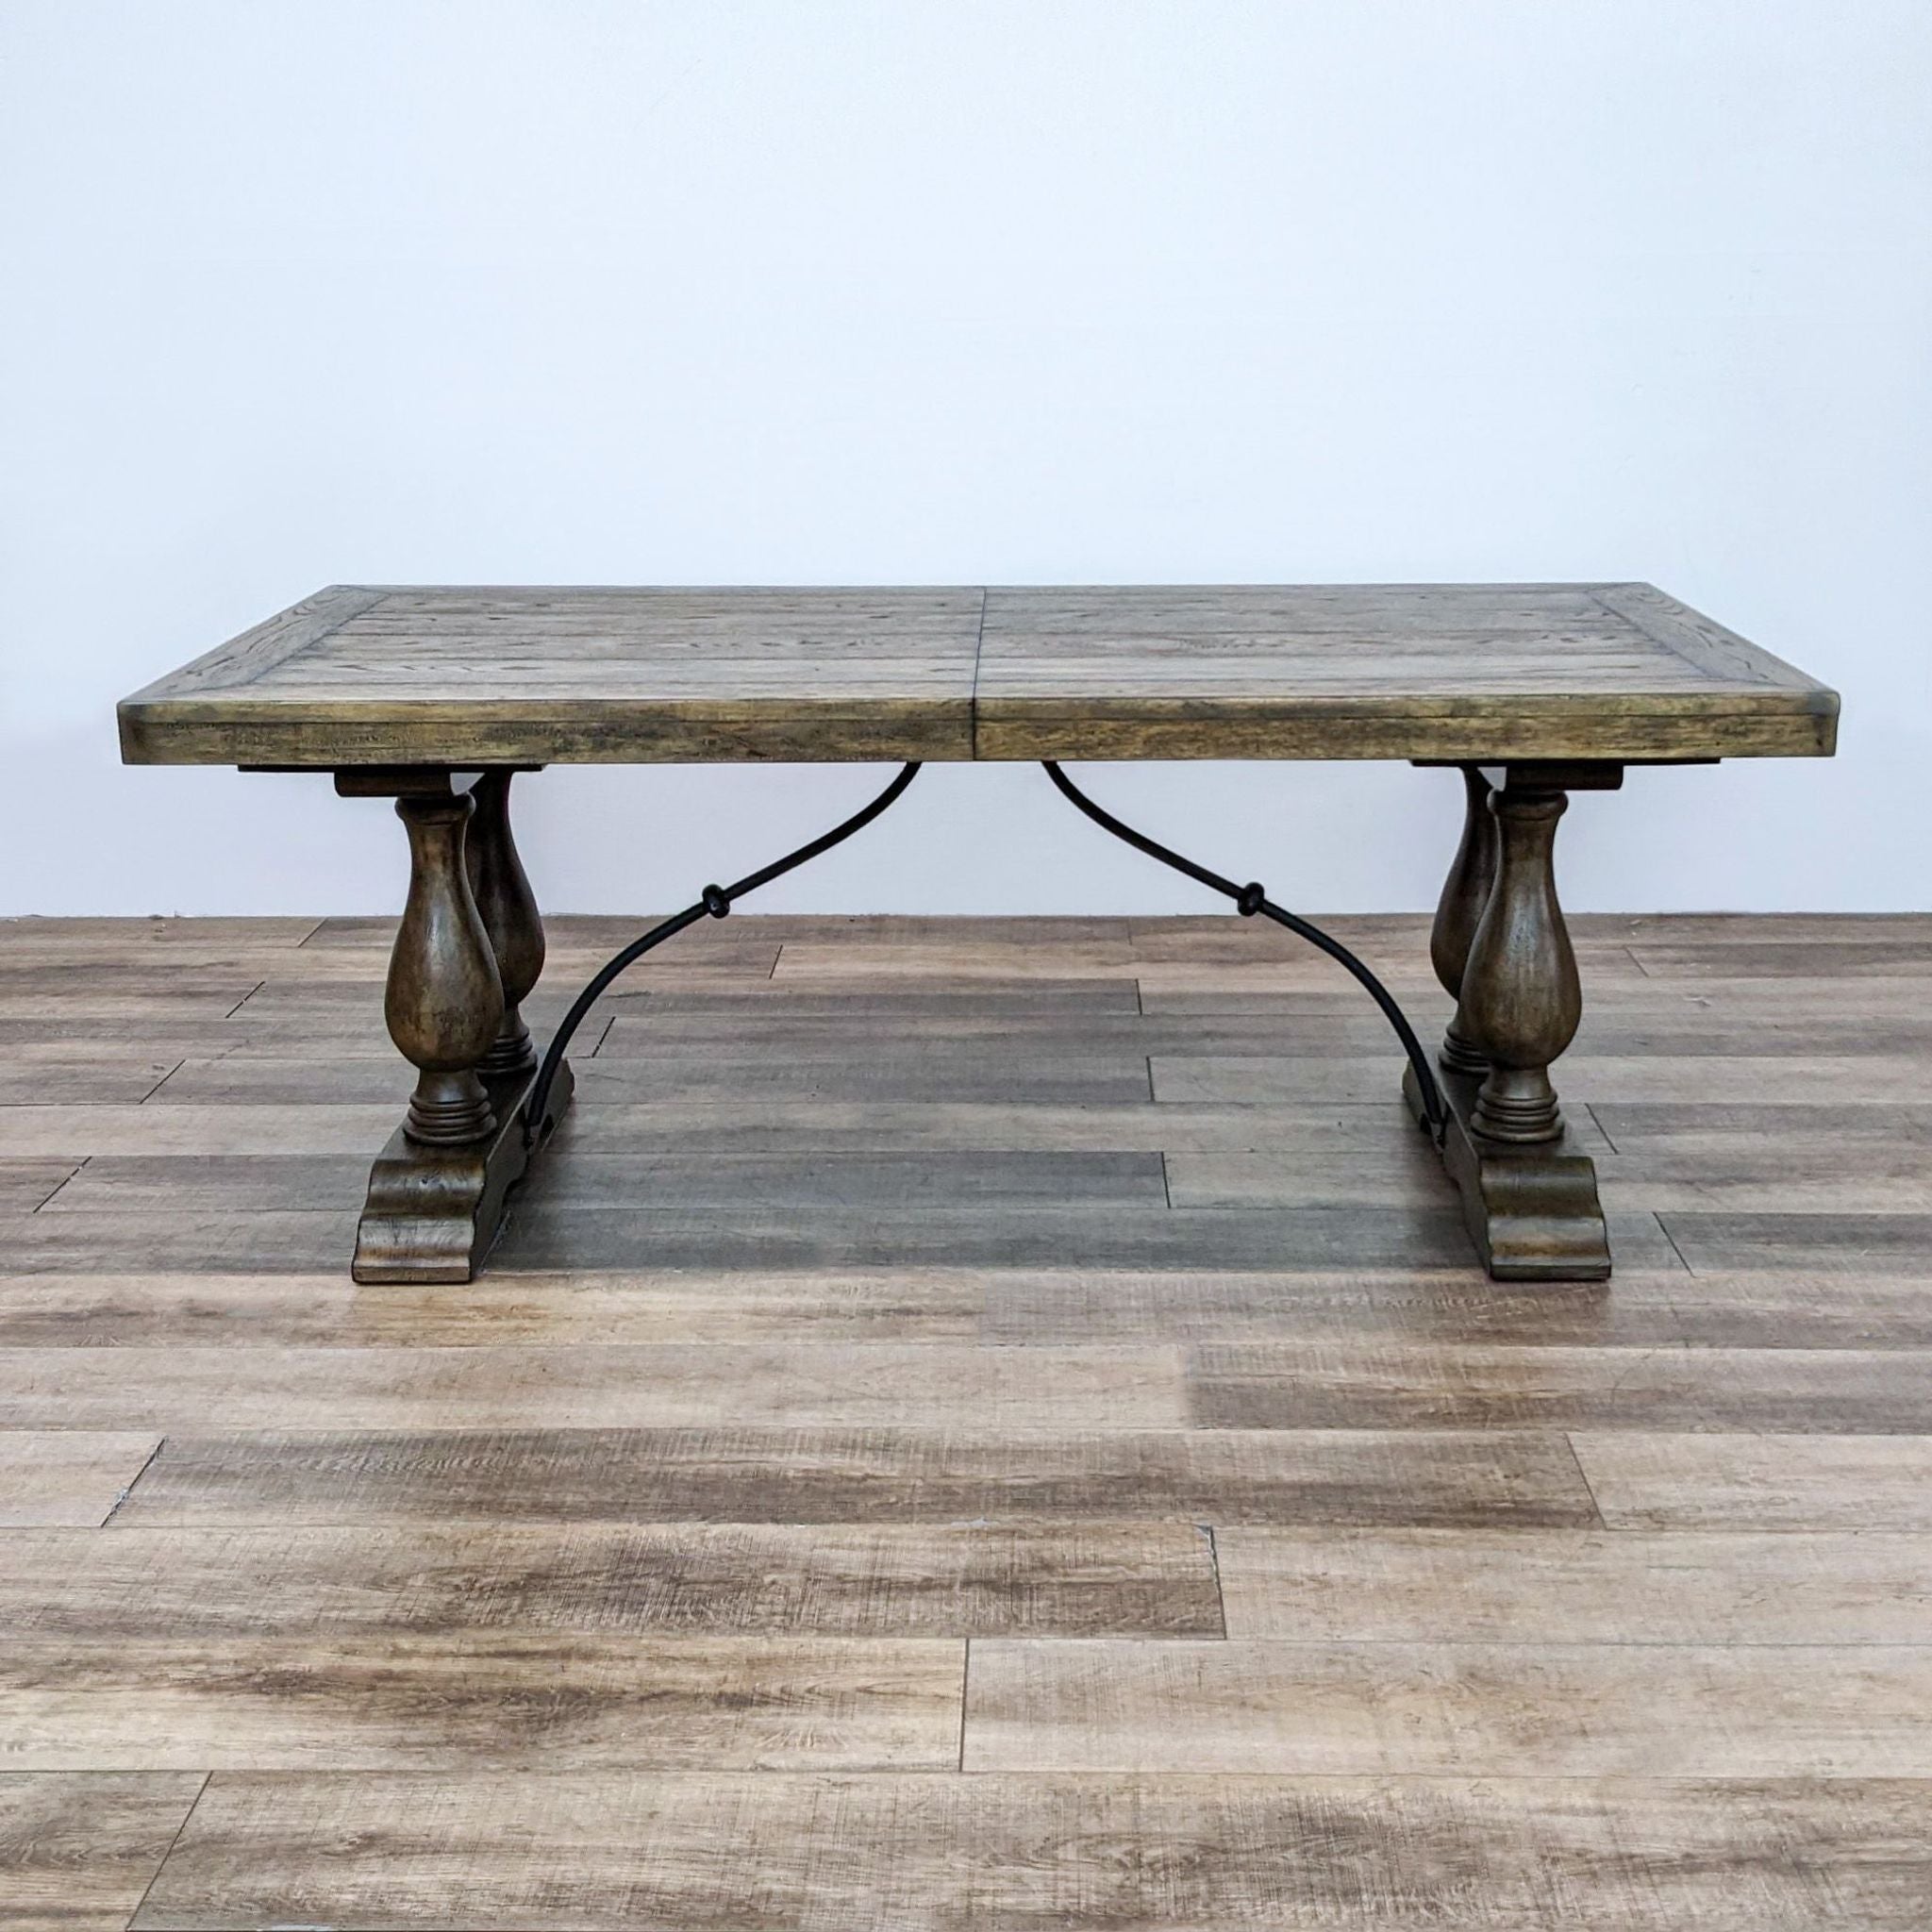 1. Pottery Barn's Loraine dining table, with traditional Spanish inspiration, showing dual pedestal bases and a serpentine metal brace.